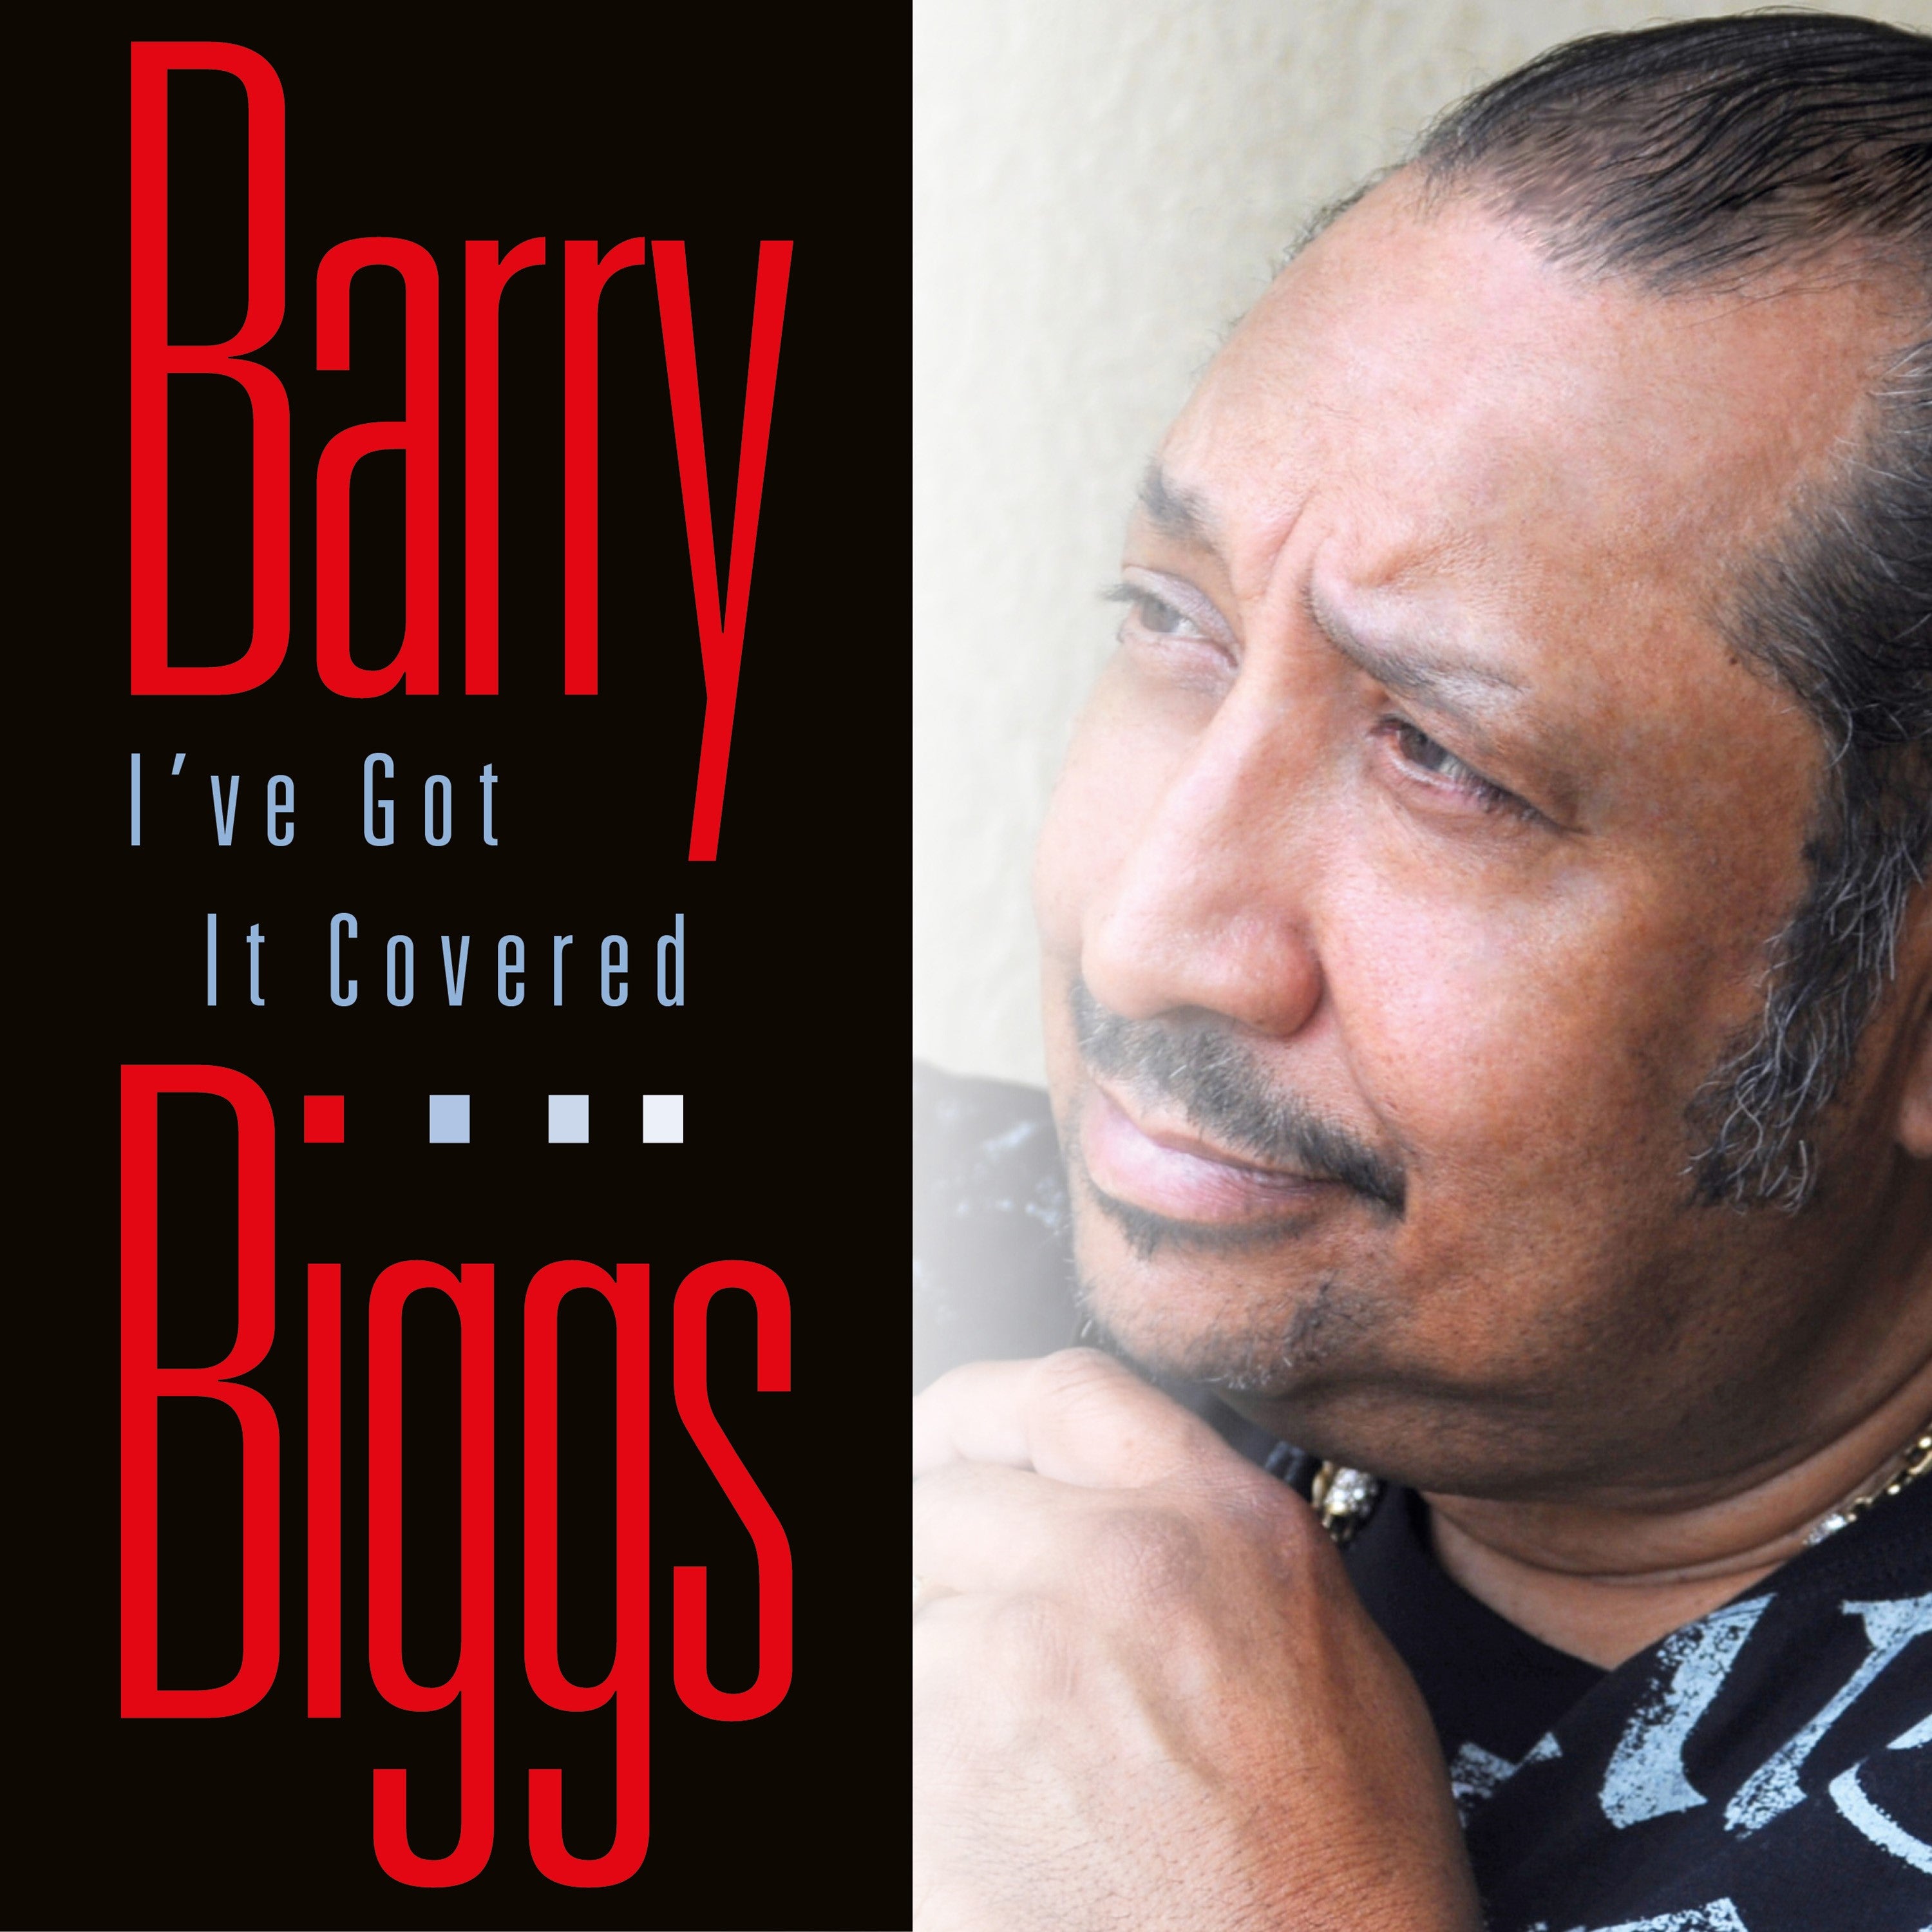 Barry Biggs - I've Got This Covered - CD